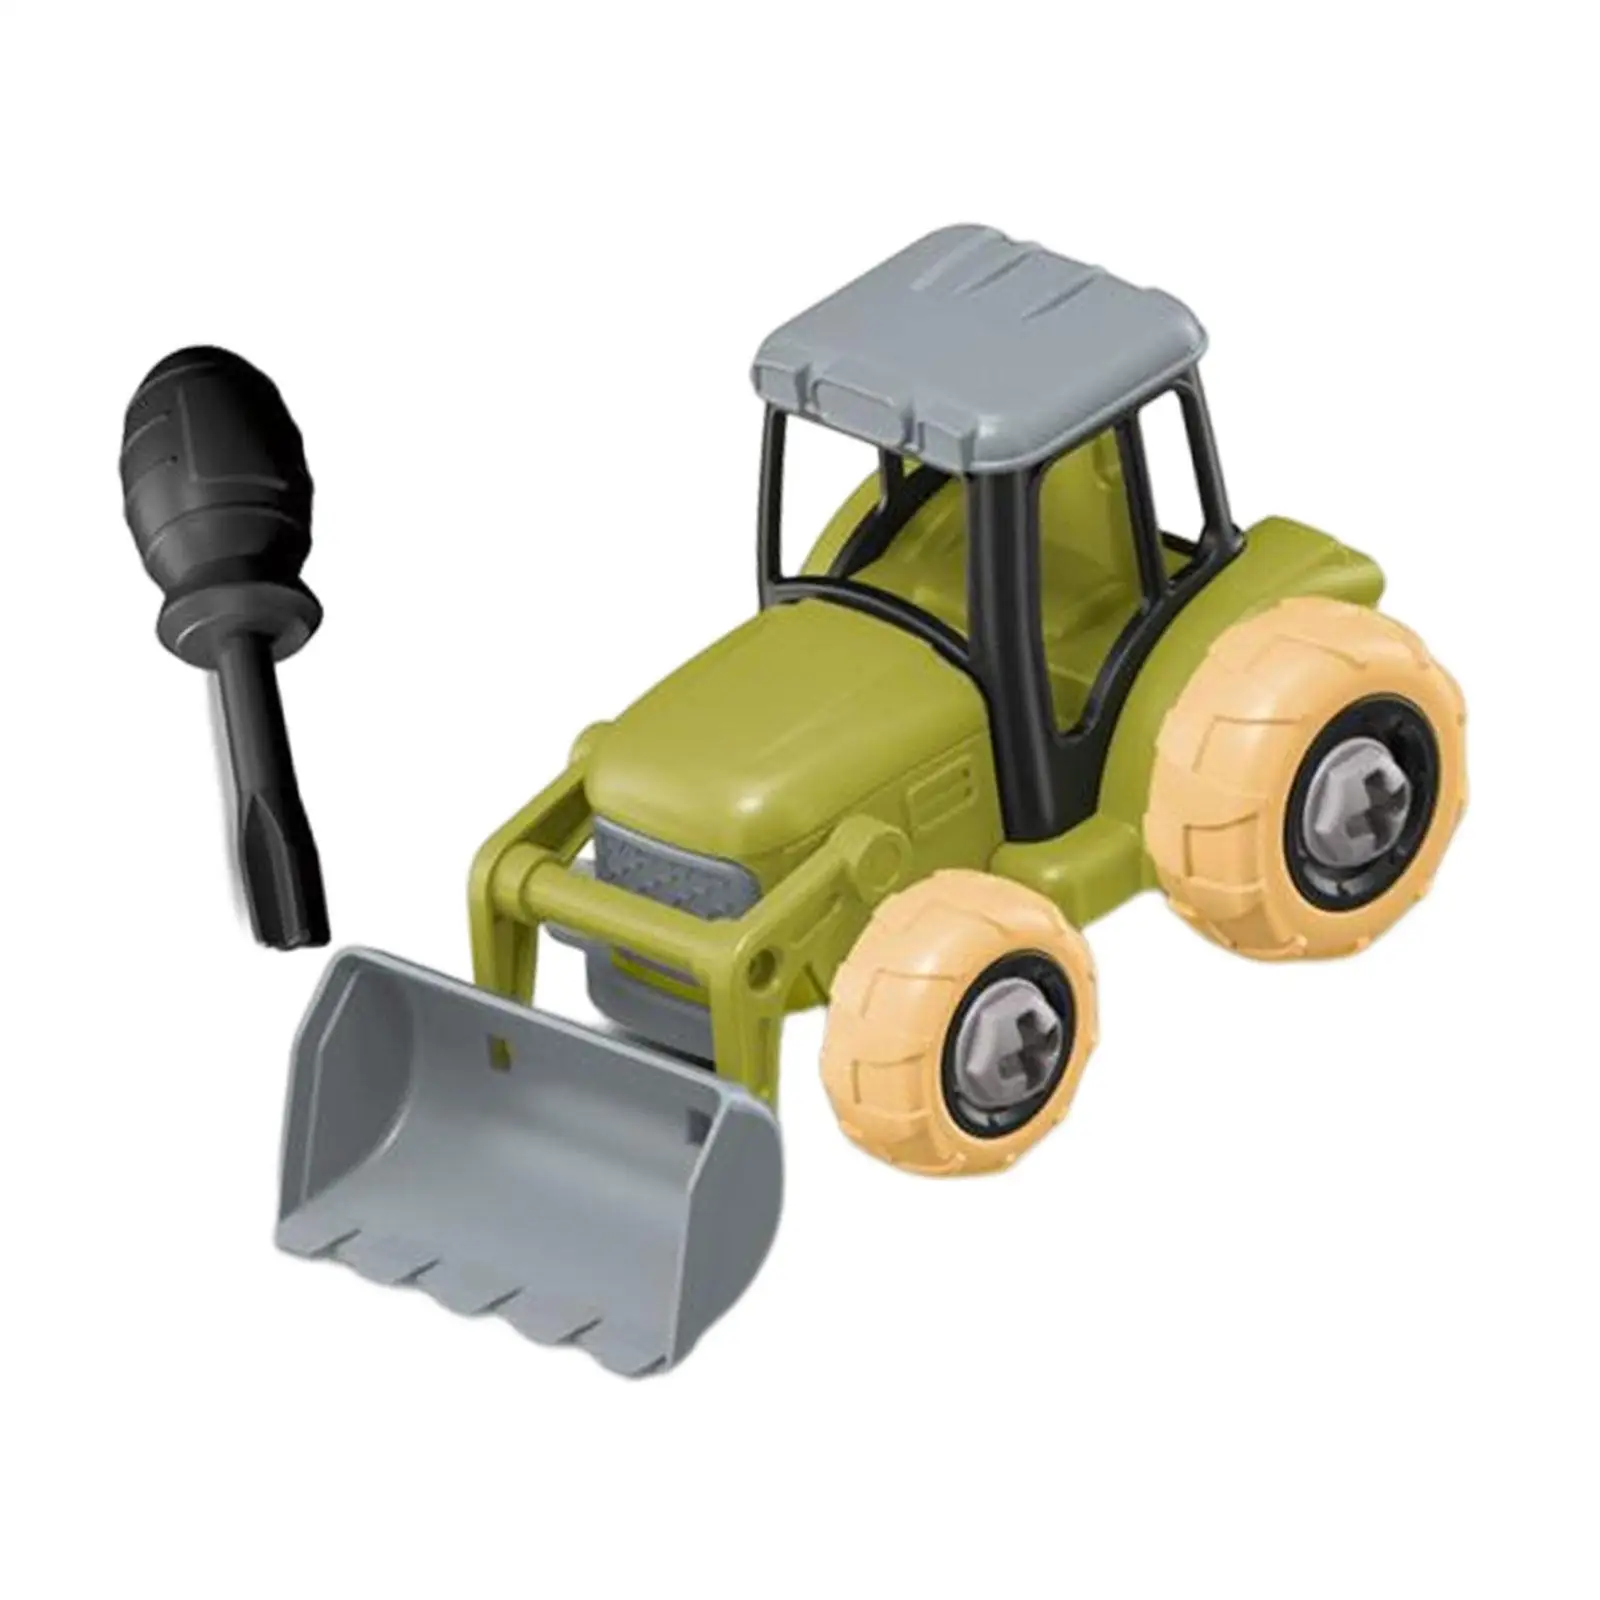 Take Apart Toy Excavator Truck with Toy Tool Building Play Set for Girls Boys 3 4 5 6 7 Year Old Preschool Kids Birthday Gifts